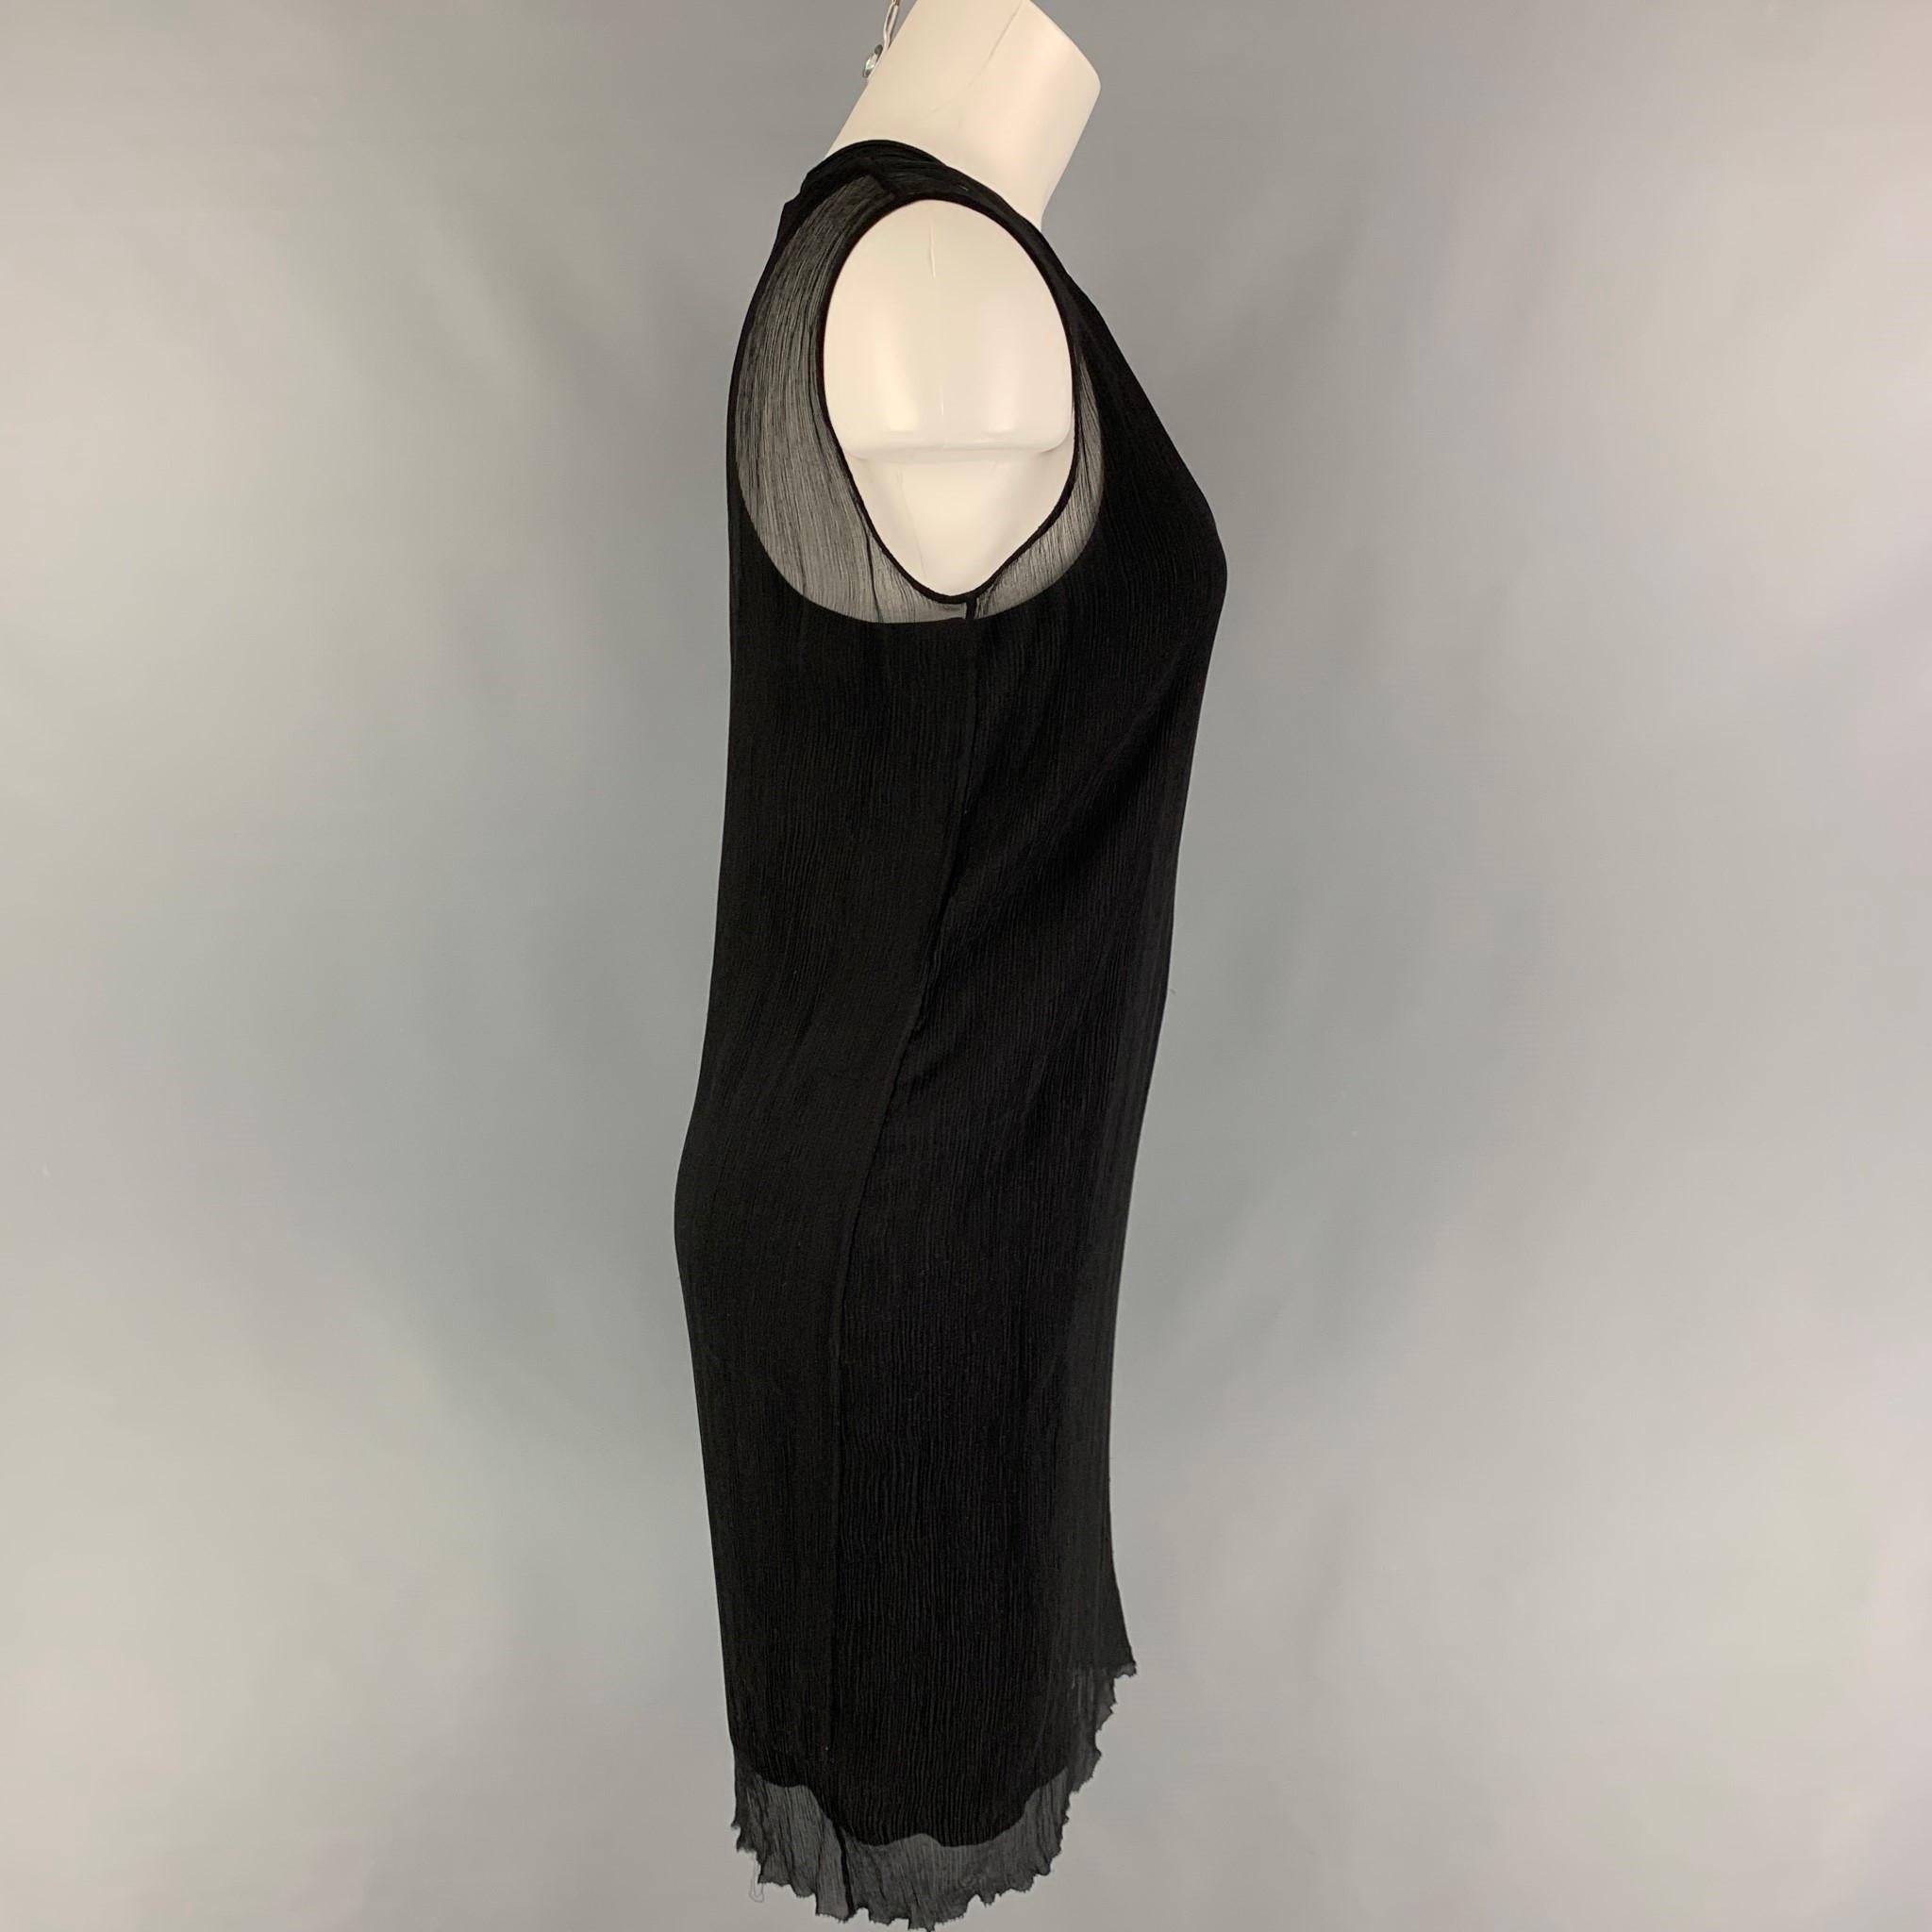 PORTS 1961 dress comes in a black wrinkled viscose featuring double layer style and no sleeves. 

Very Good Pre-Owned Condition.
Marked: 4

Measurements:

Shoulder: 14 in.
Bust: 32 in.
Hip: 36 in.
Length: 37 in. 